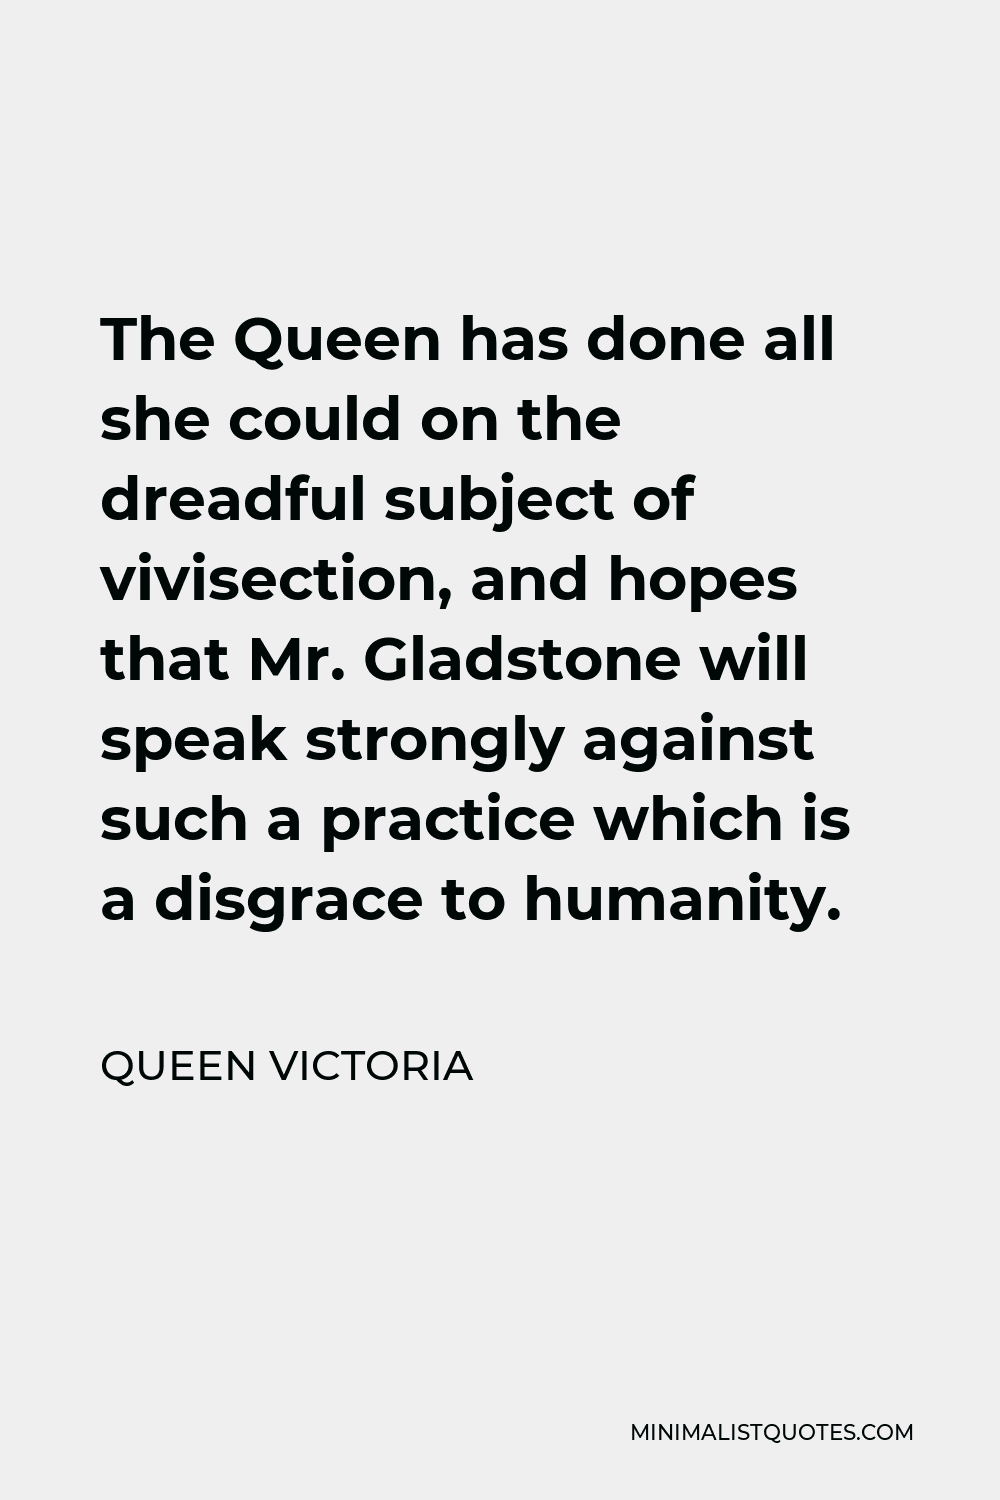 Queen Victoria Quote - The Queen has done all she could on the dreadful subject of vivisection, and hopes that Mr. Gladstone will speak strongly against such a practice which is a disgrace to humanity.